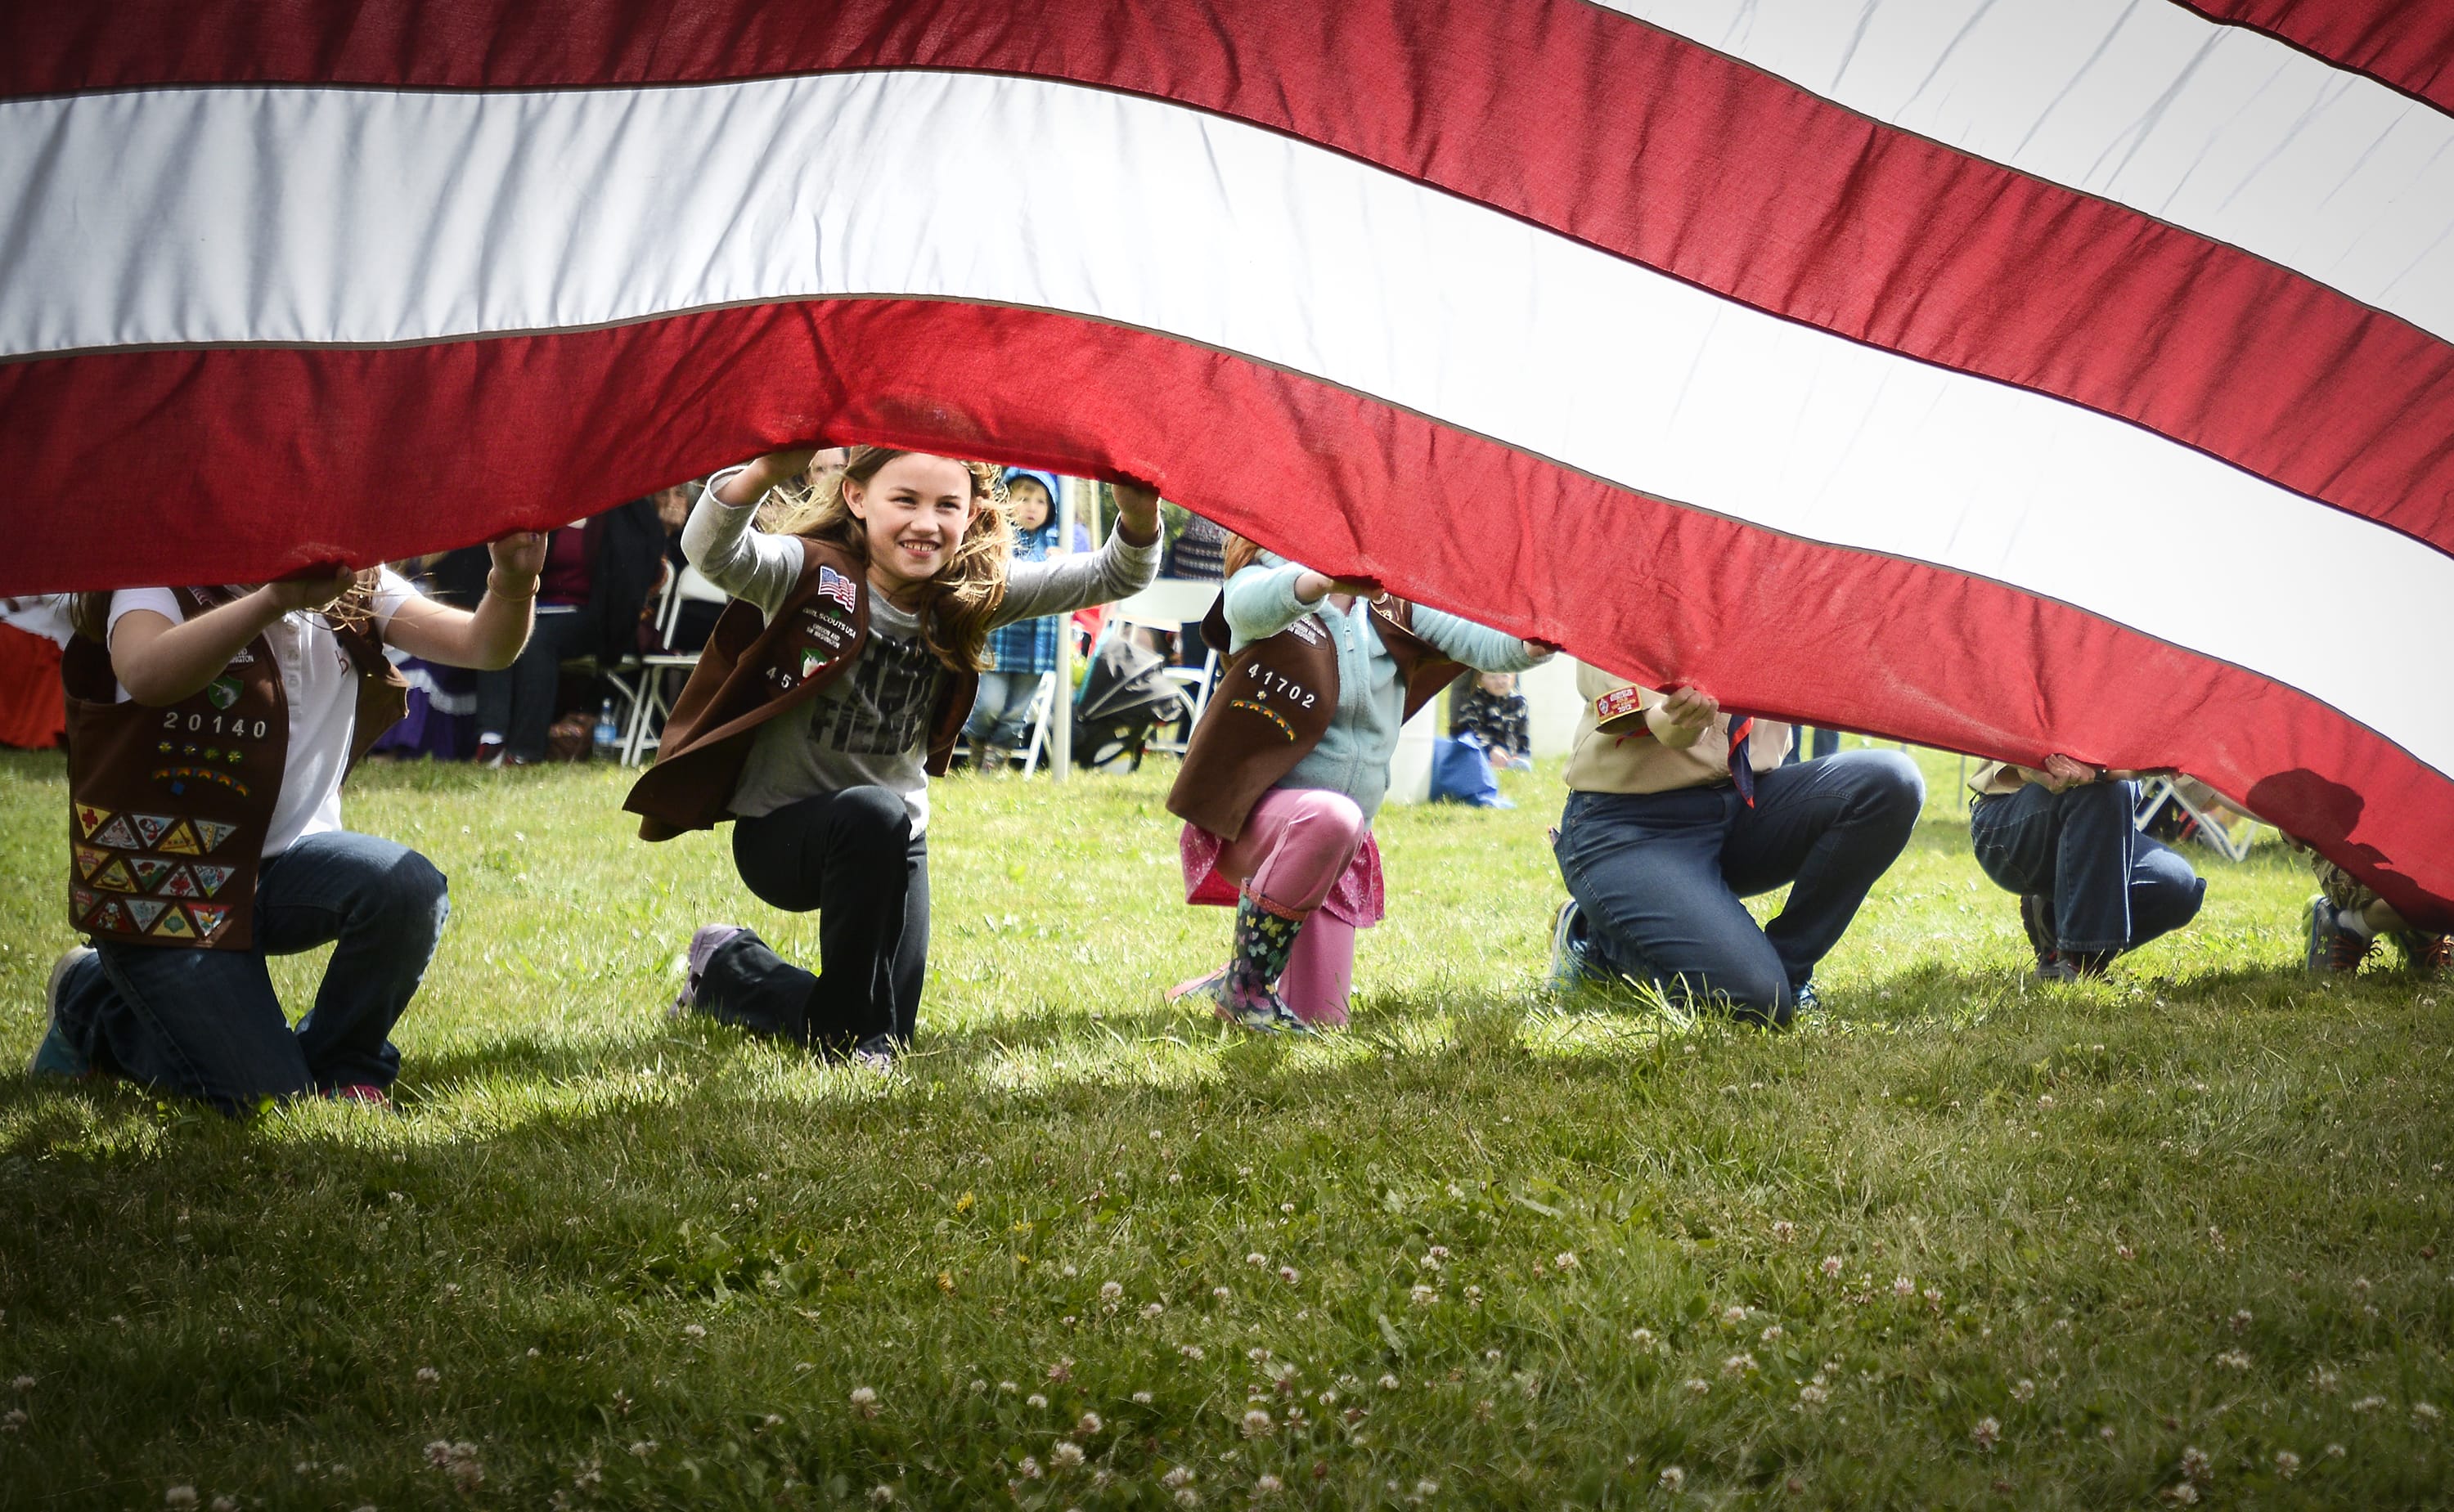 Mikaela Fisher, a member of Brownie Girl Scout Troop #45722, helps hold a flag at Fort Vancouver during the Flag Day celebration, Tuesday June 14, 2016.